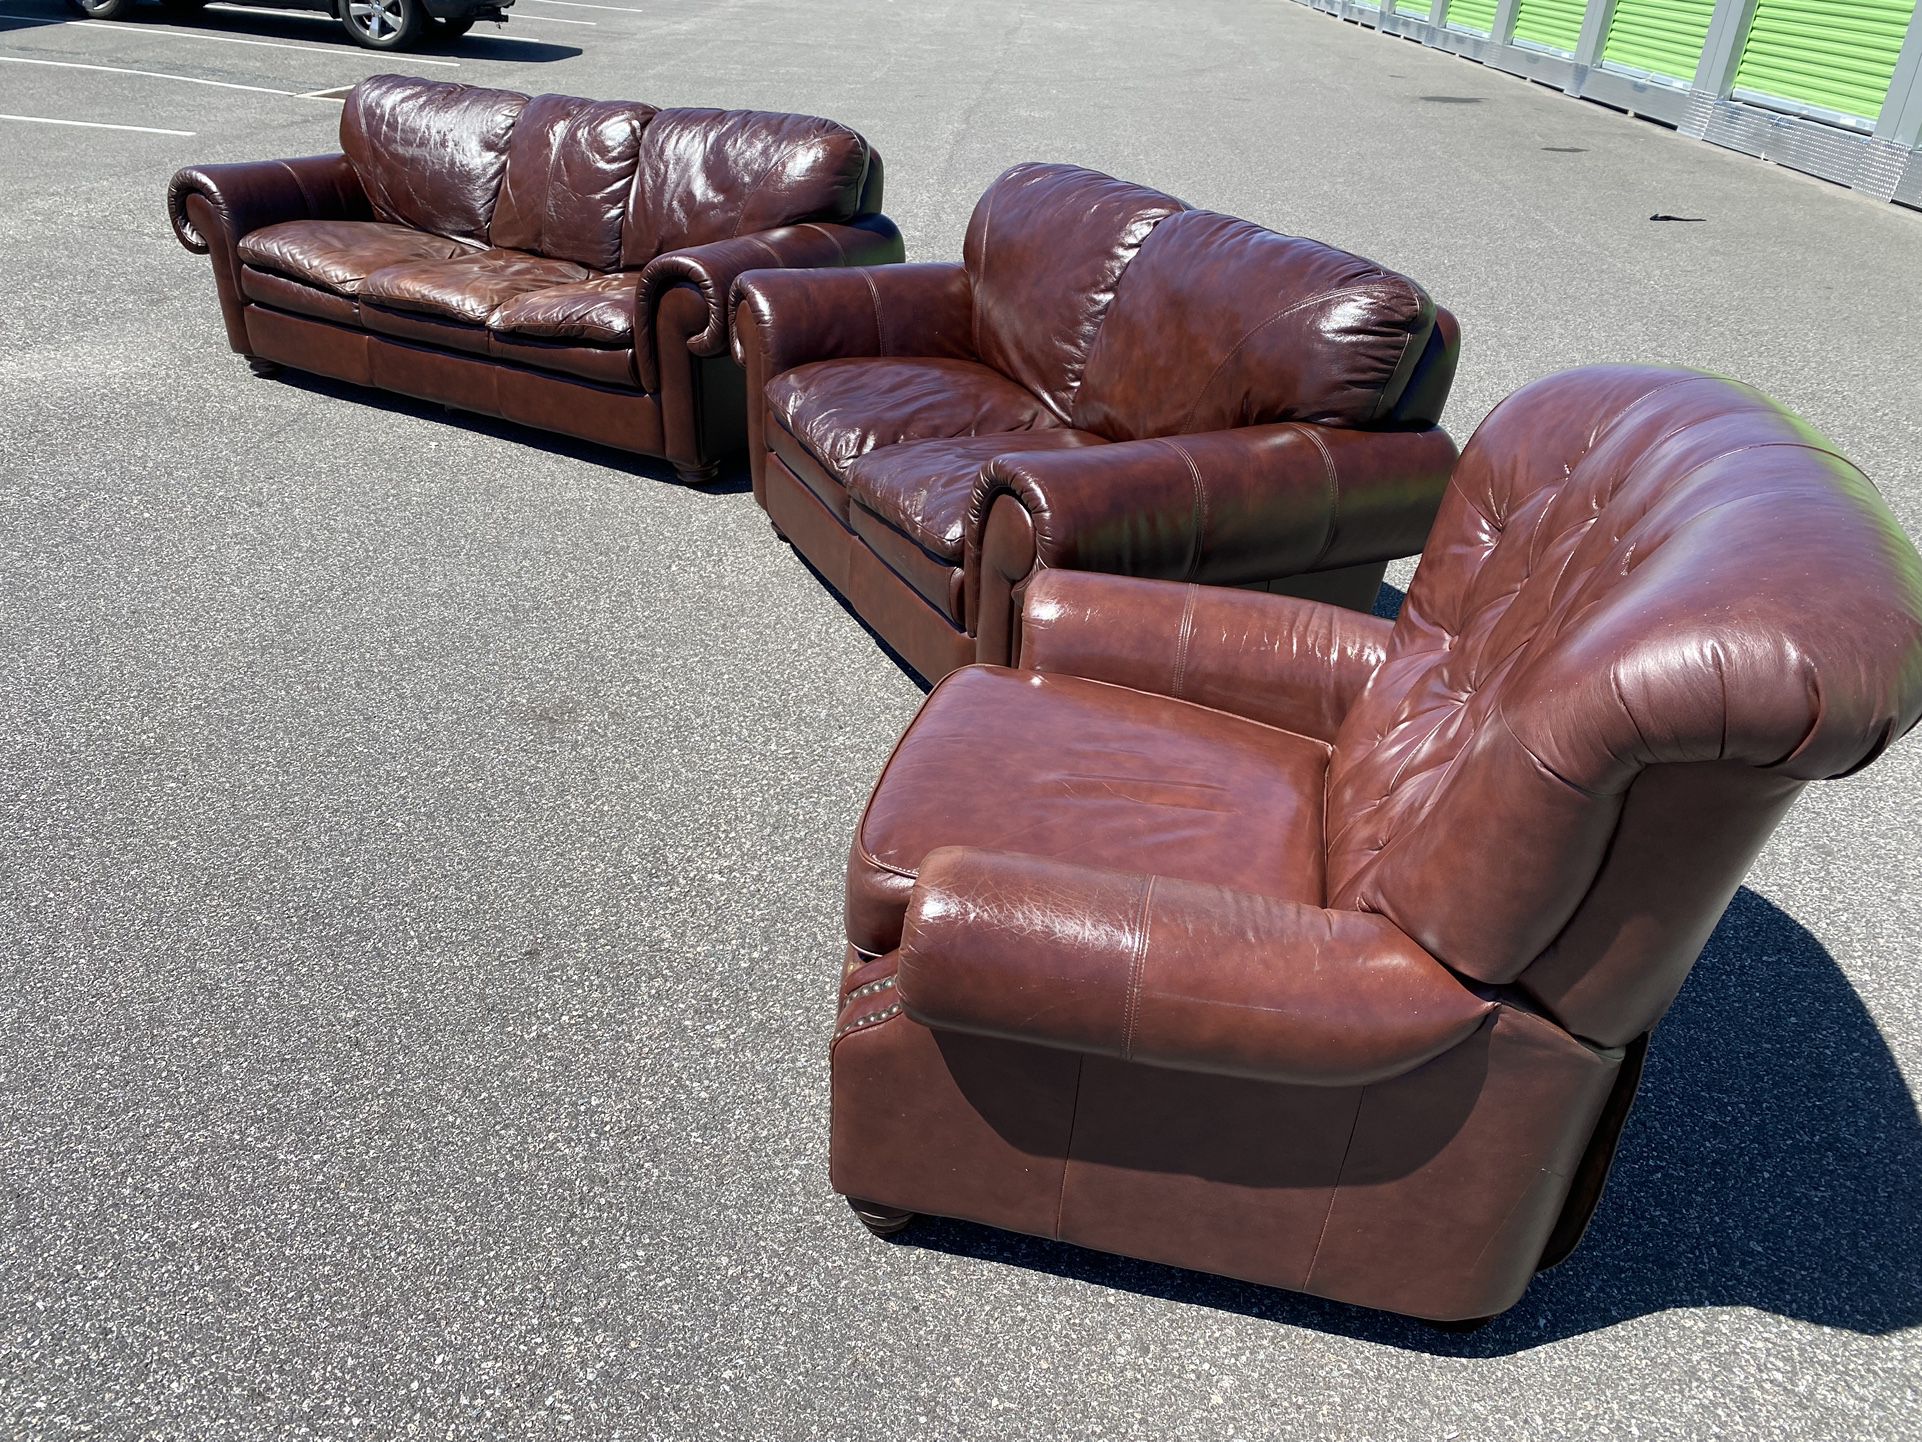 FREE DELIVERY - Italian Brown Real Leather Sofa Love Seat Chair (Look My Profile For More Options)